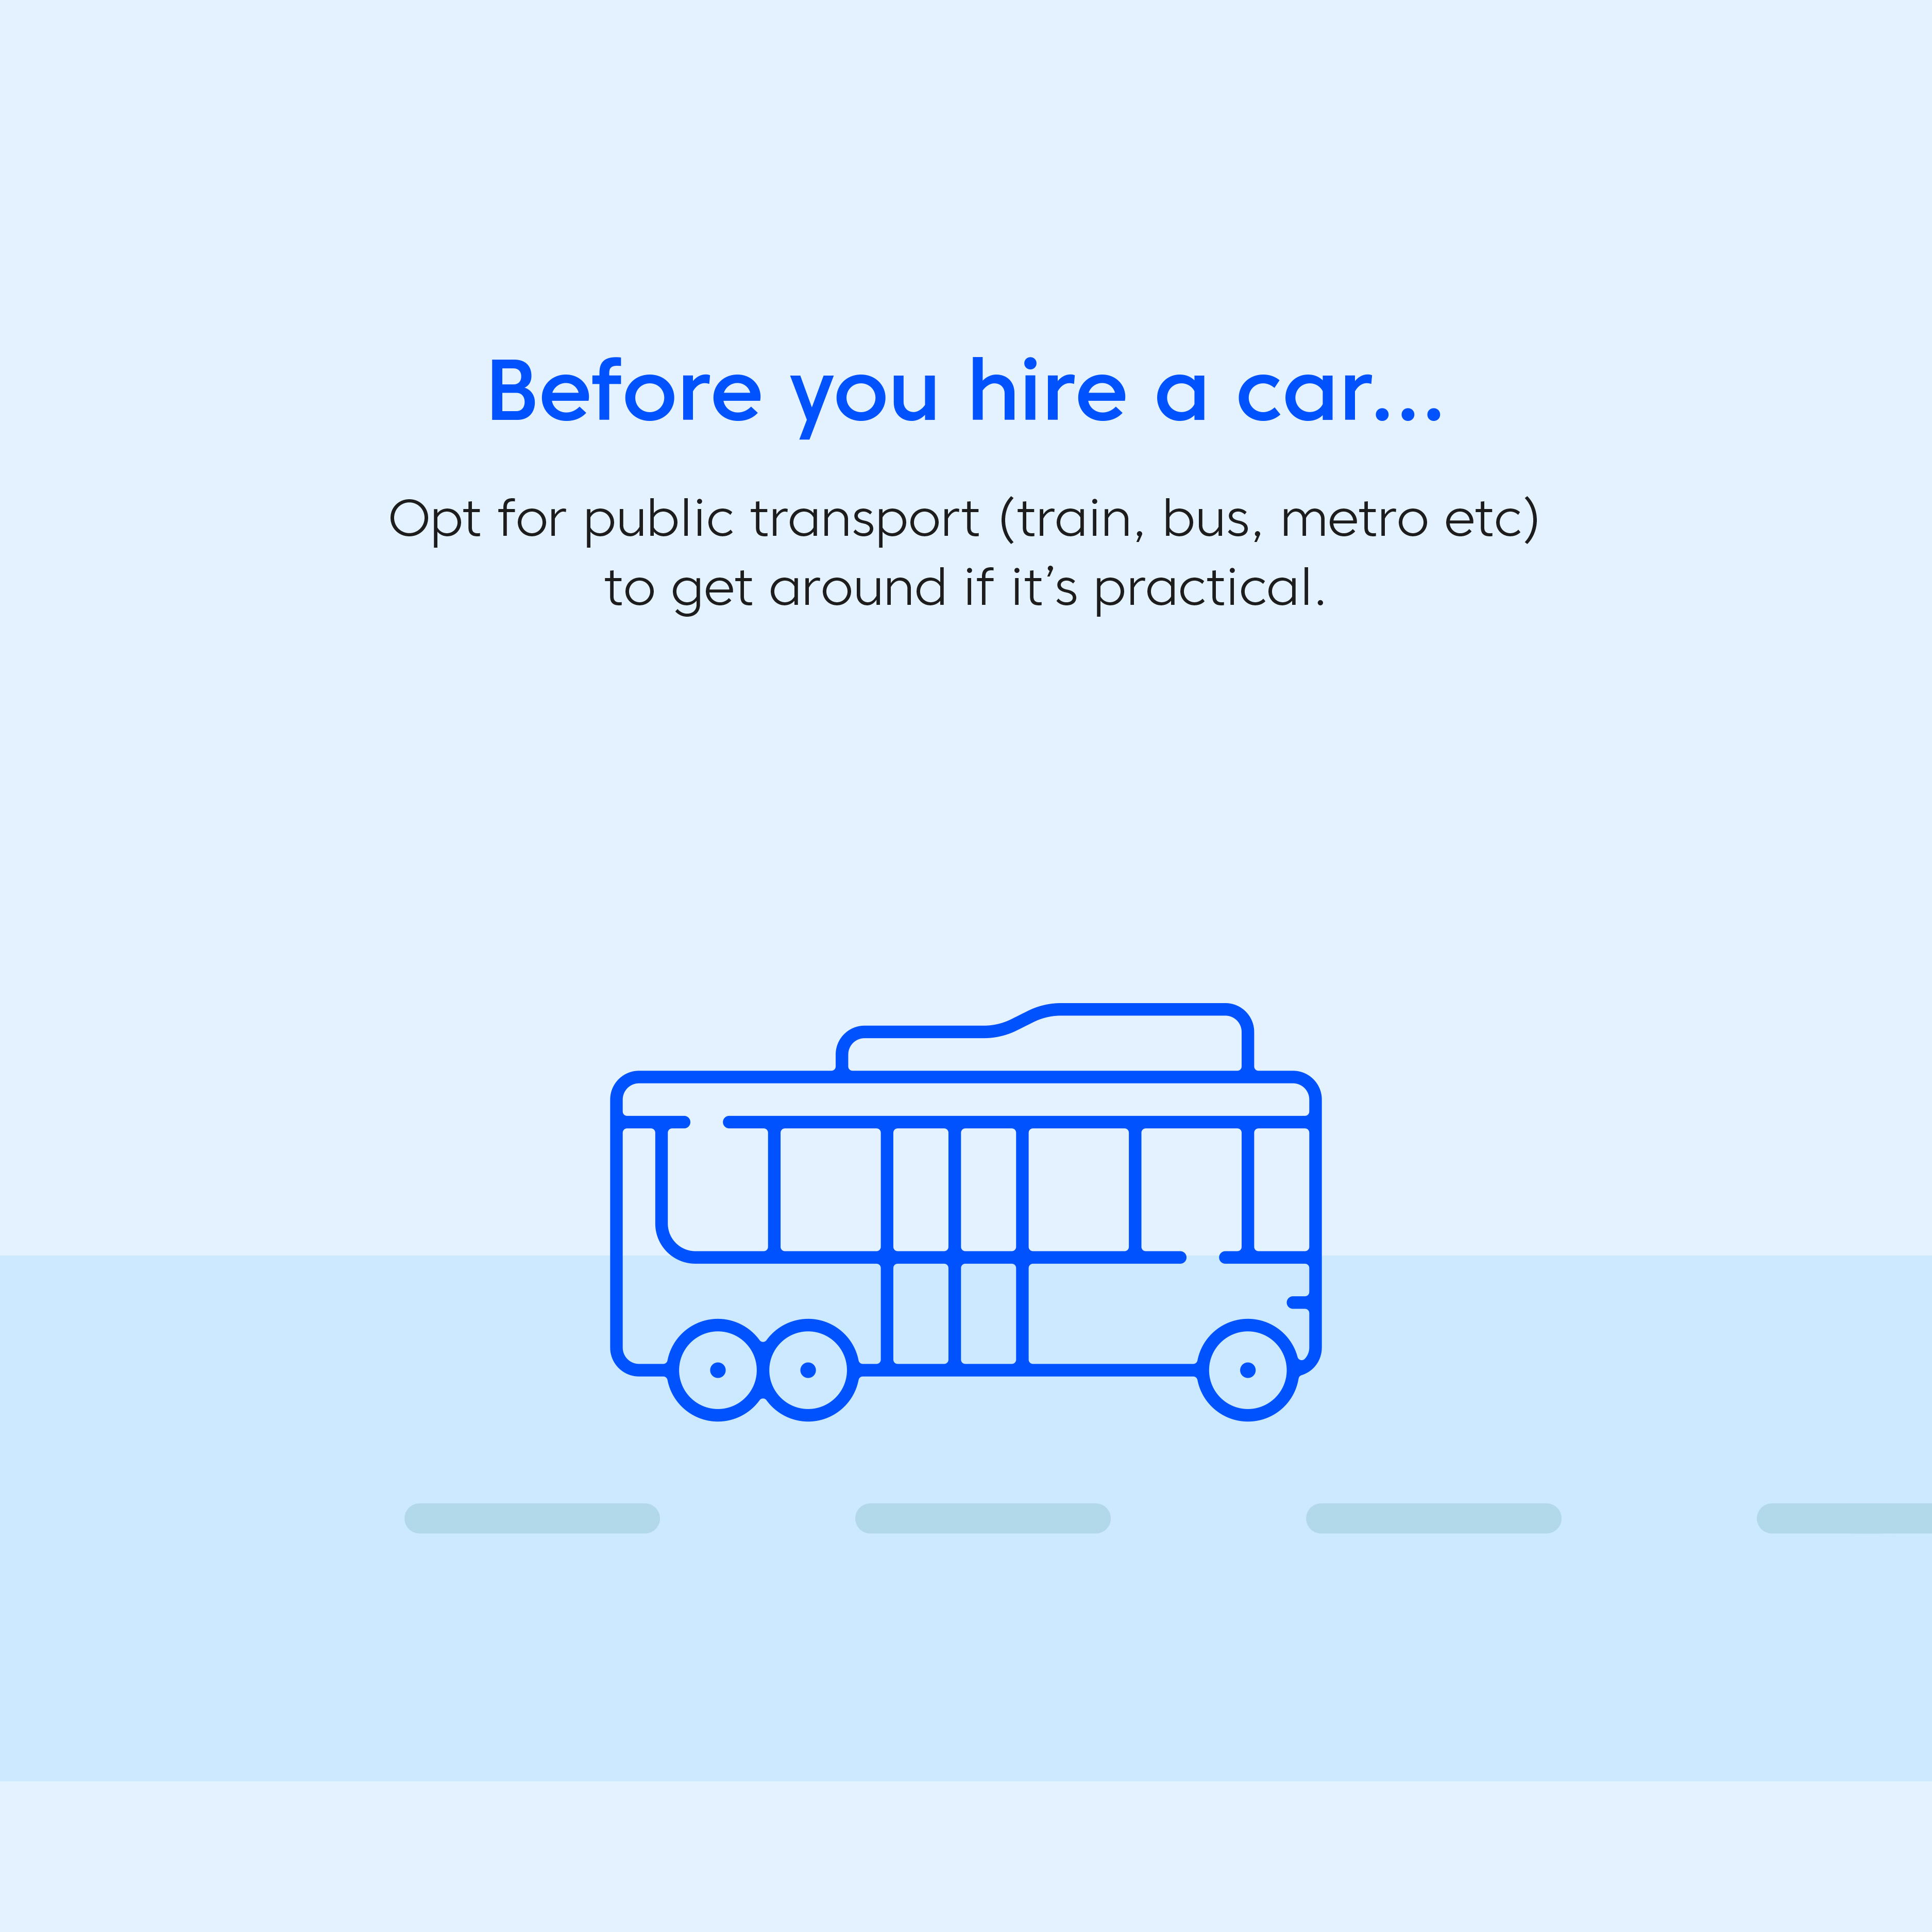 Before you hire a car opt for public transport